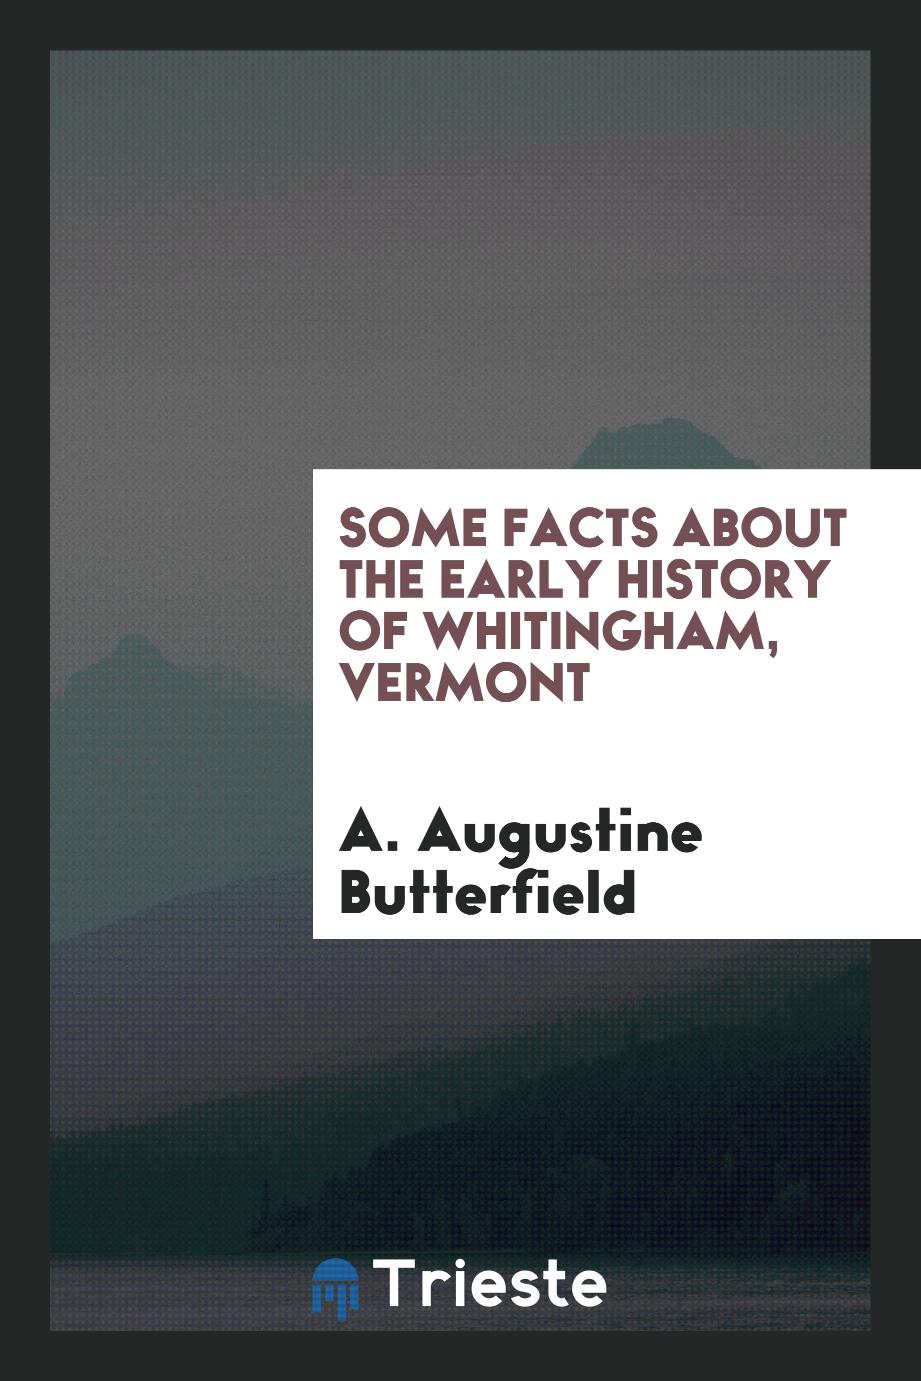 Some facts about the early history of Whitingham, Vermont